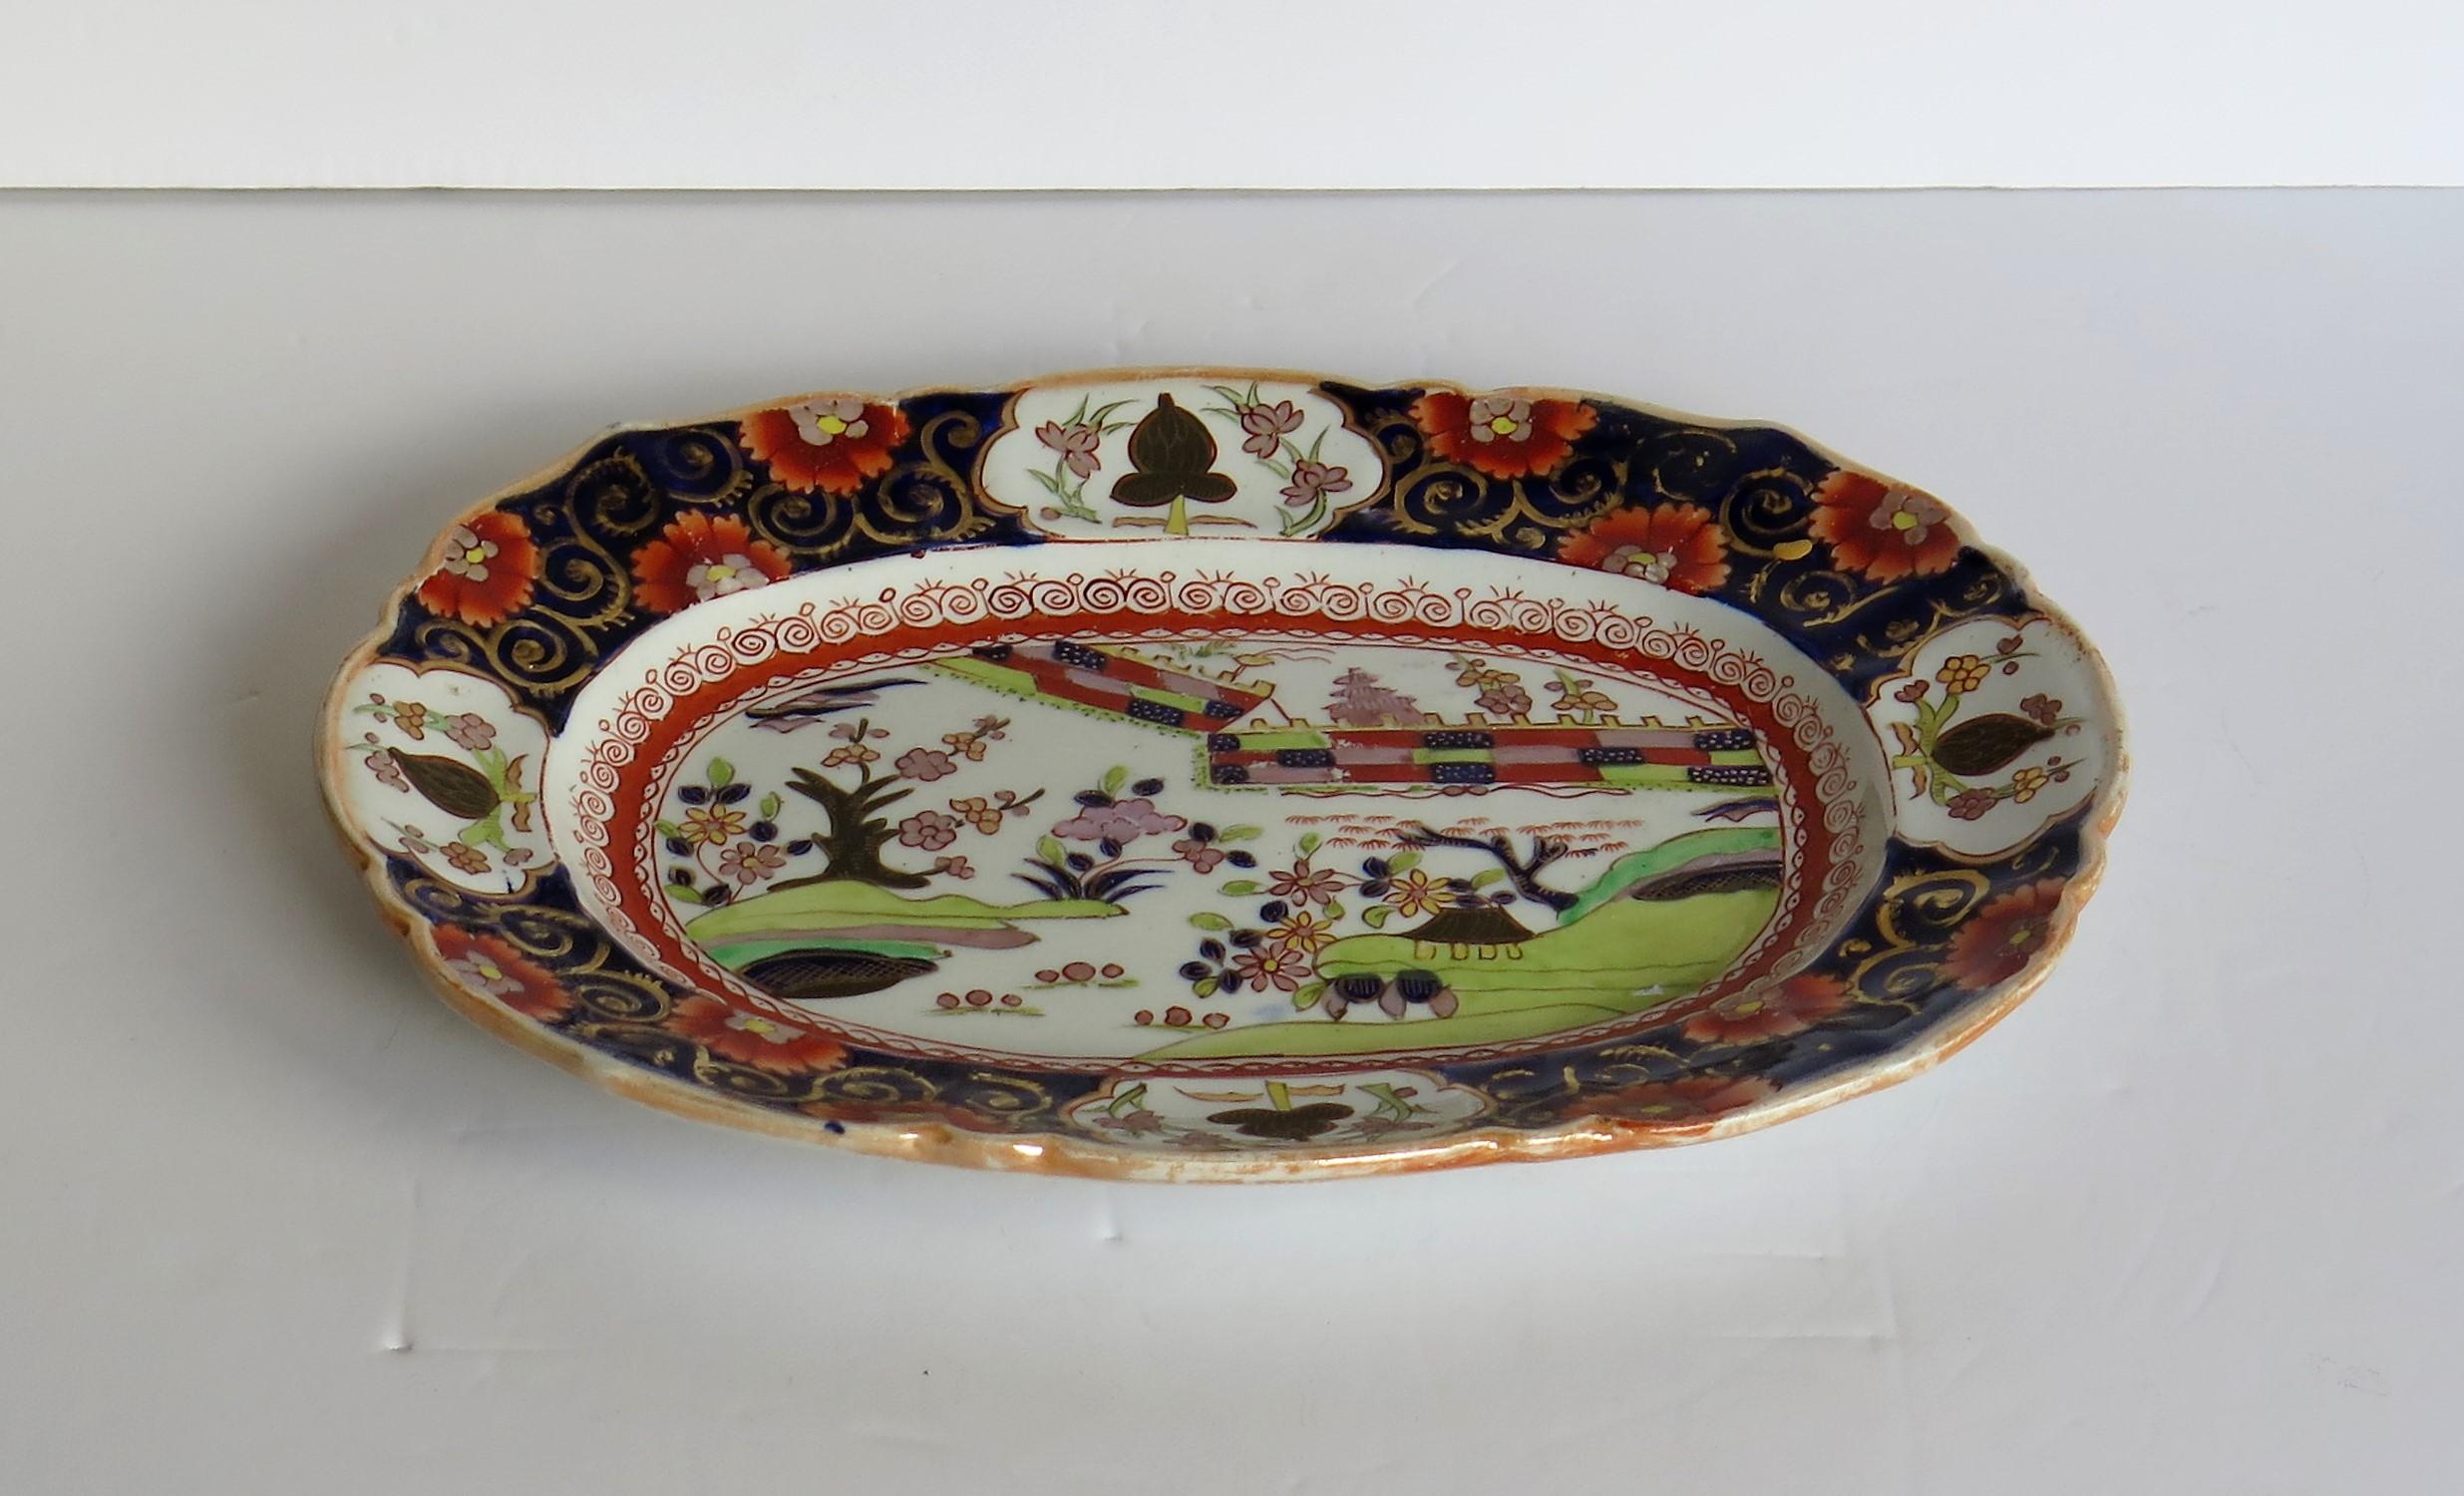 This is an early platter or oval plate, hand painted in the colored wall pattern by Mason's Ironstone, Lane Delph, England, dating to circa 1825.

The piece is well potted in an oval shape with a wavy rim.

This very decorative pattern is hand